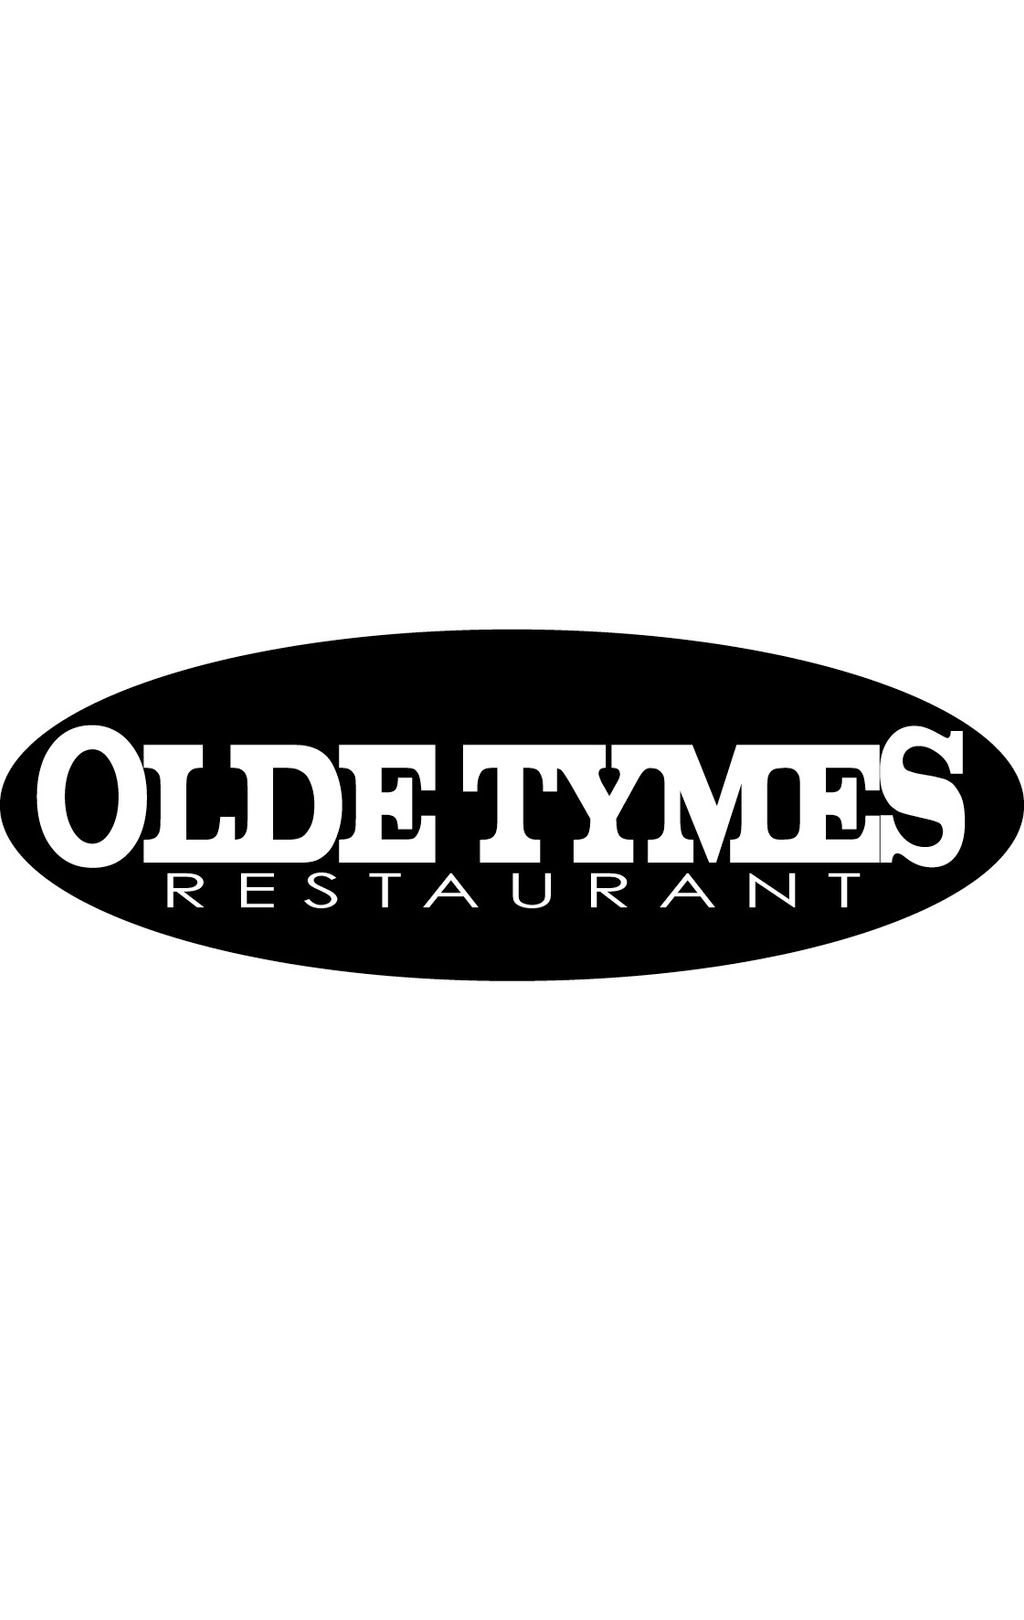 Olde tymes Restaurant & Catering